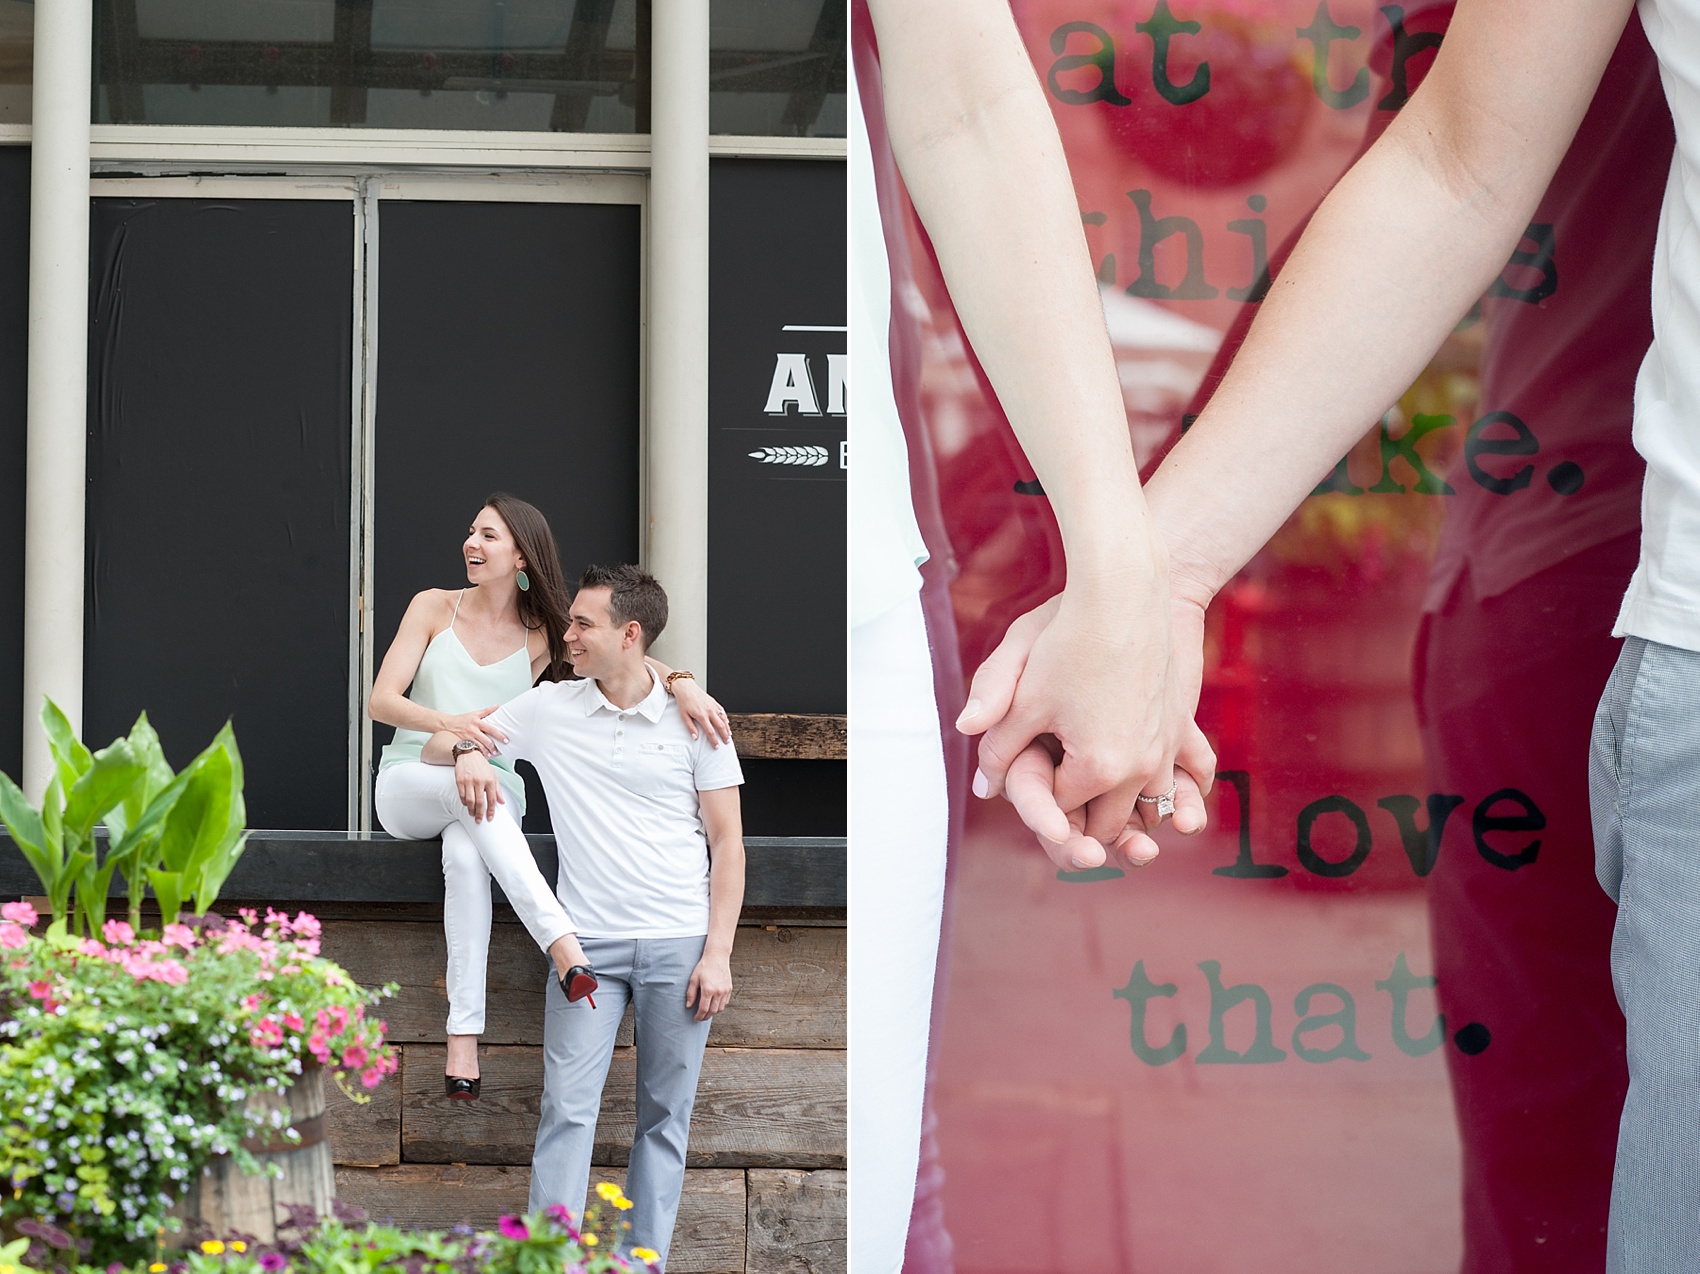 South Street Seaport engagement session in NYC. Photos by Mikkel Paige Photography. #nyc #southstreetseaport